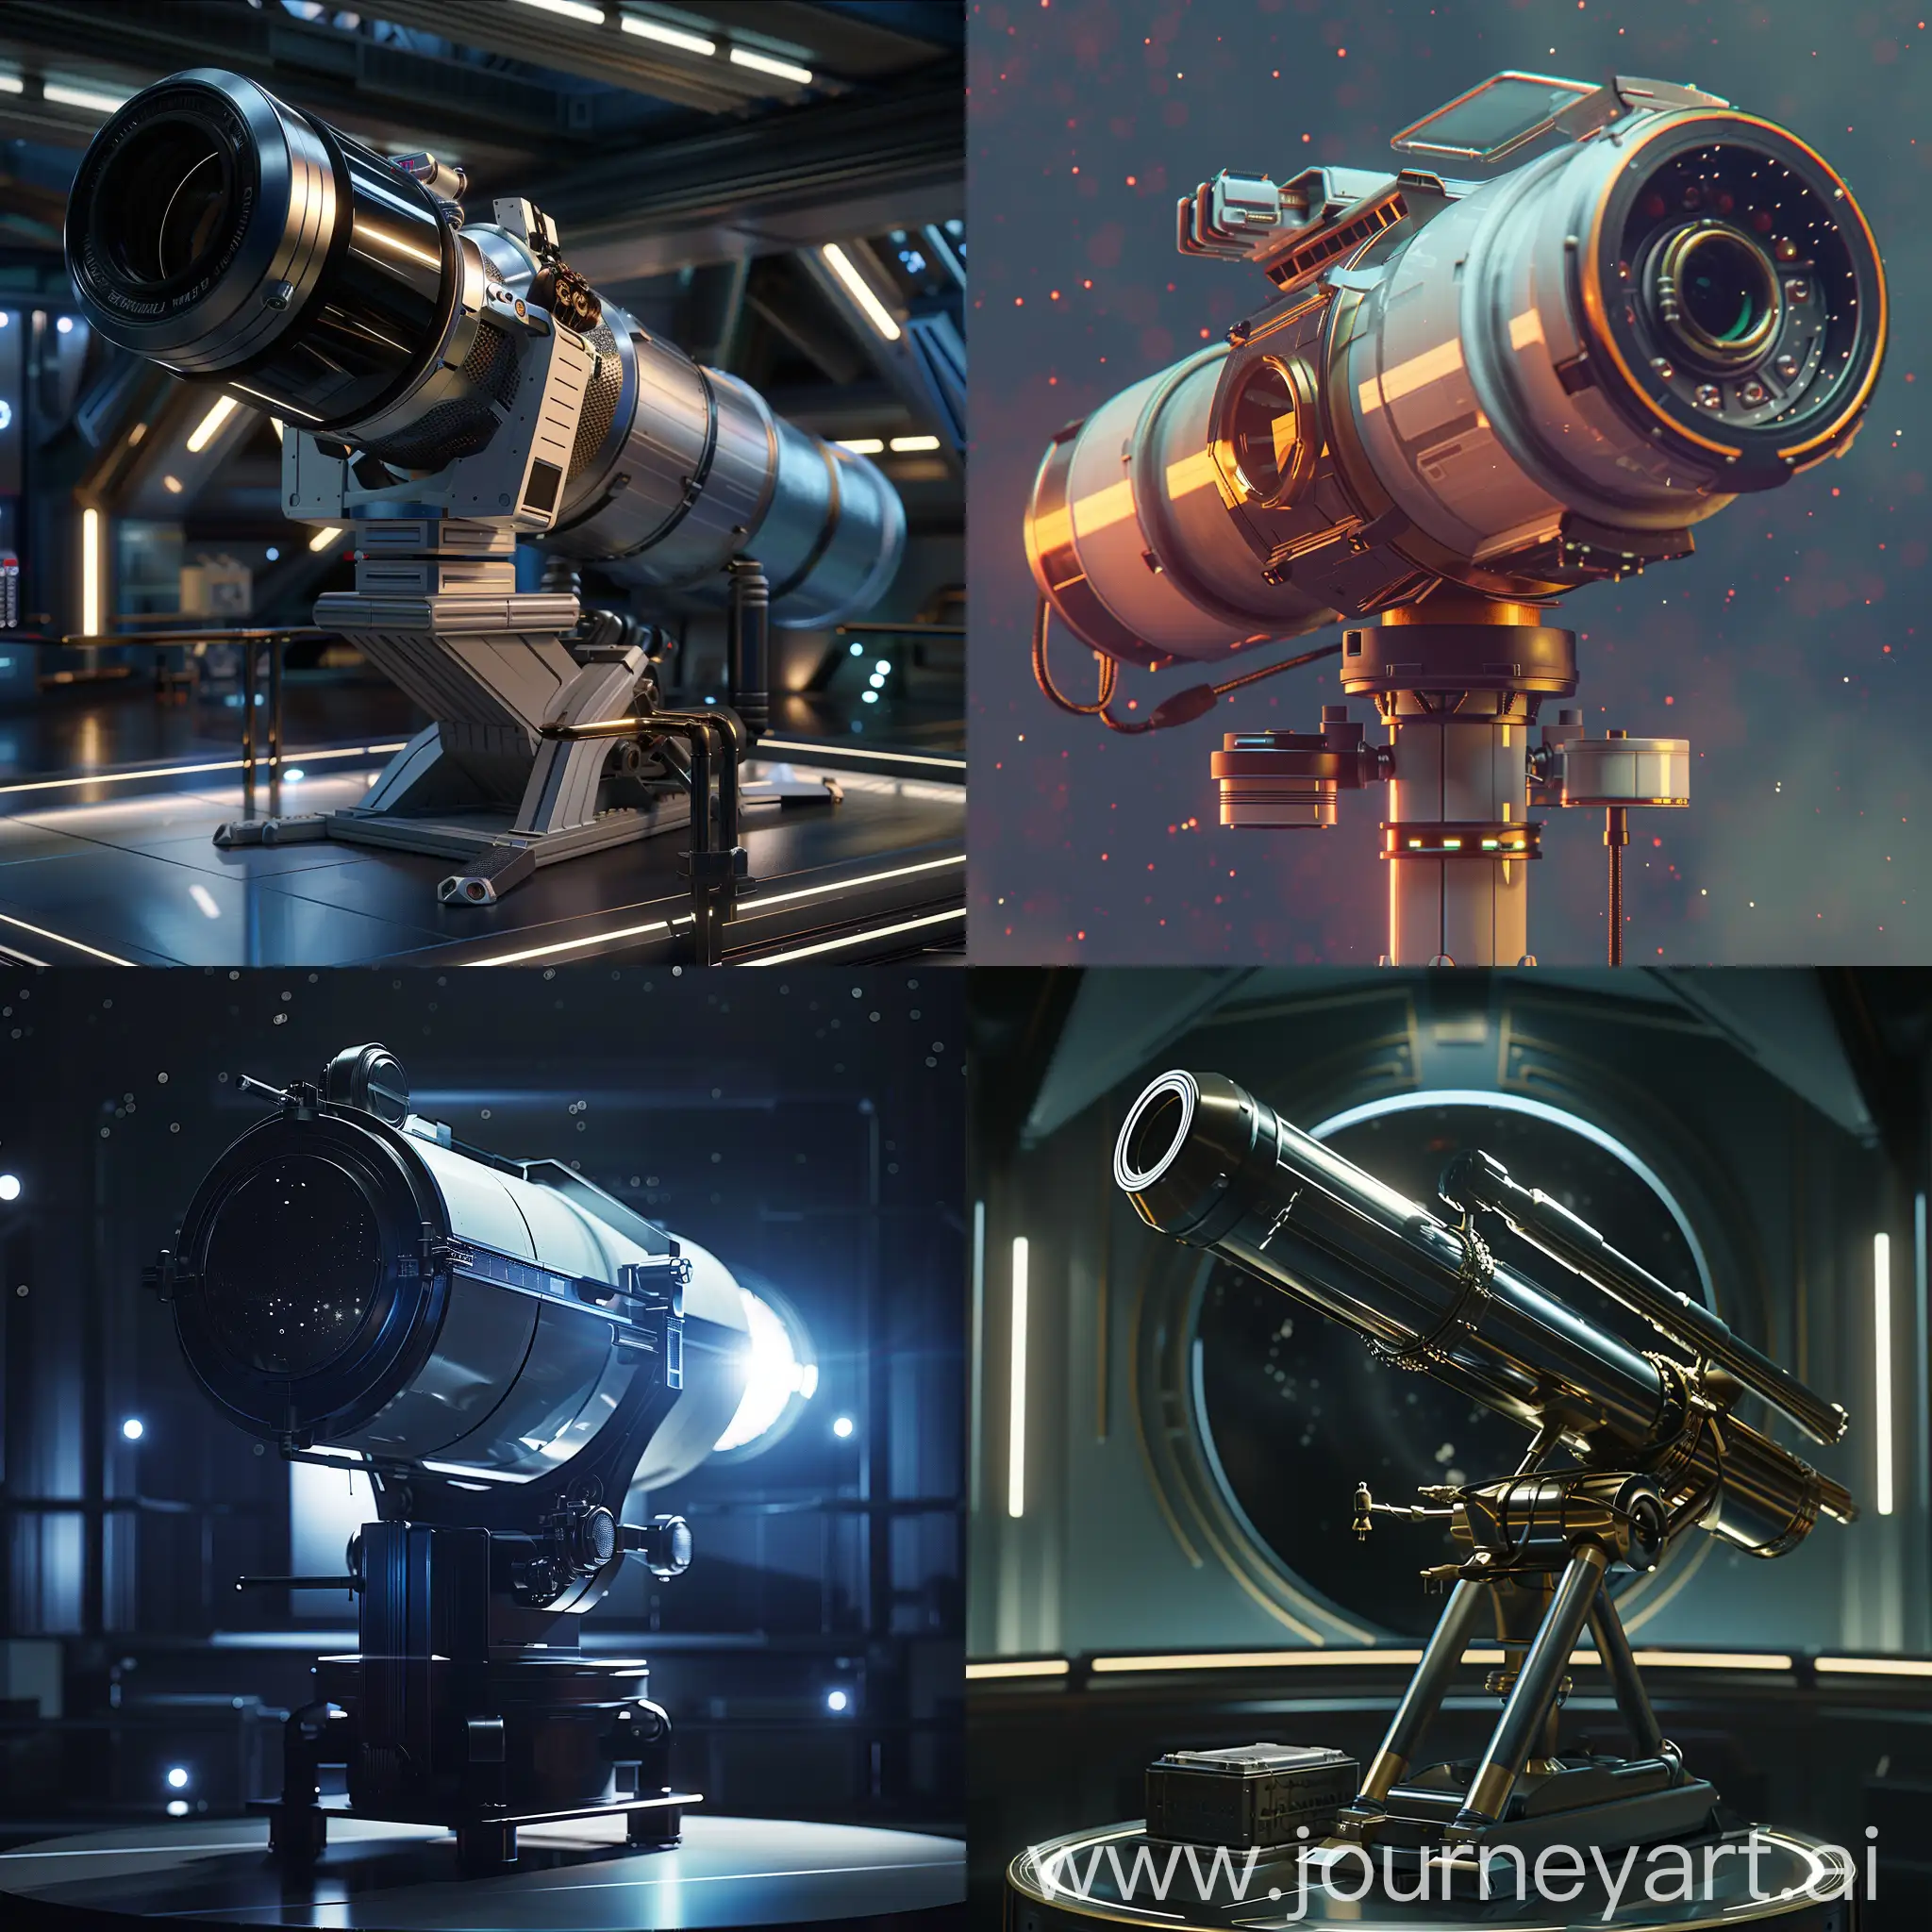 Futuristic-Space-Telescope-with-Soft-Lighting-and-Backlighting